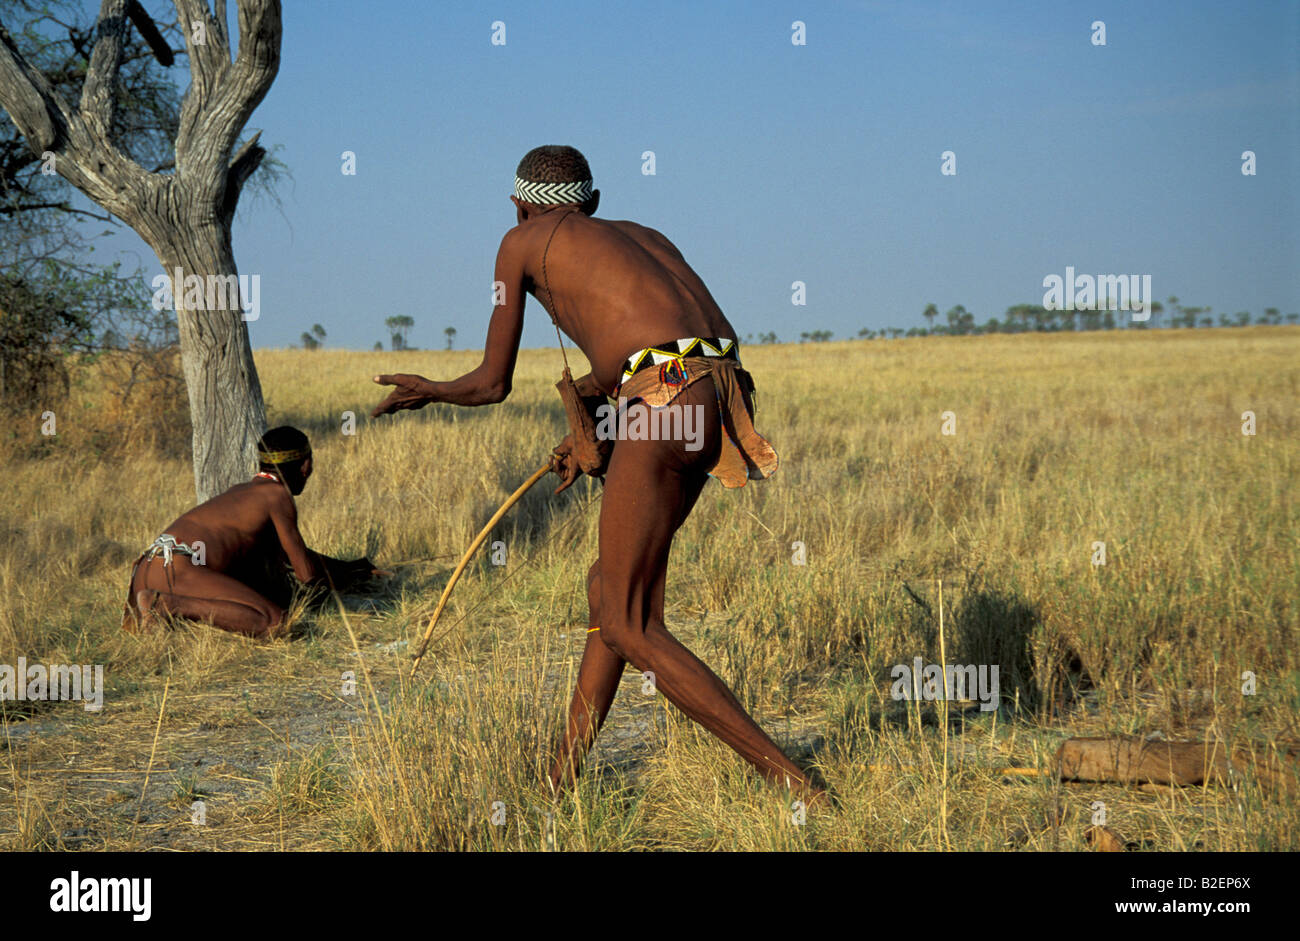 Pair of bushmen stalking with bow and arrow Stock Photo